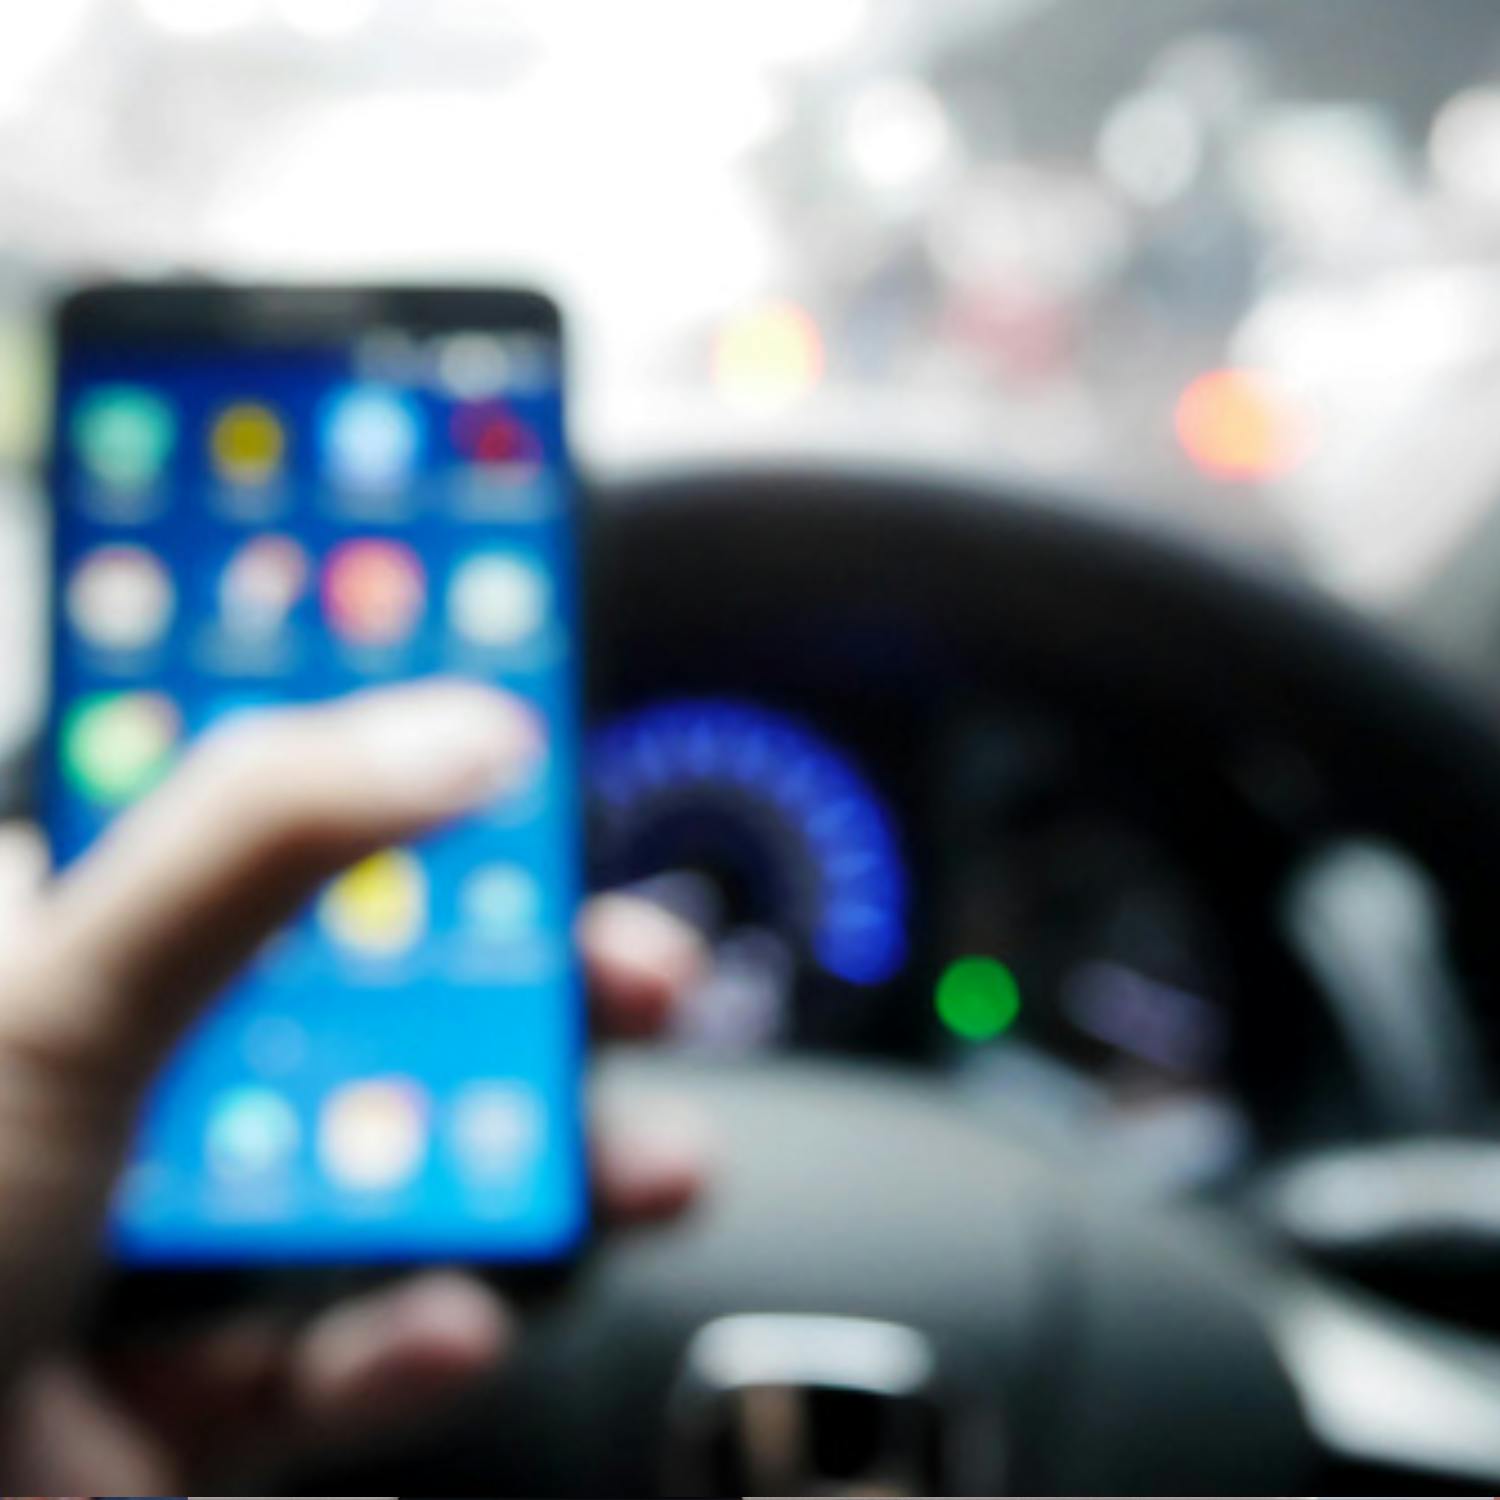  Incidents of mobile phone use while driving is on the rise